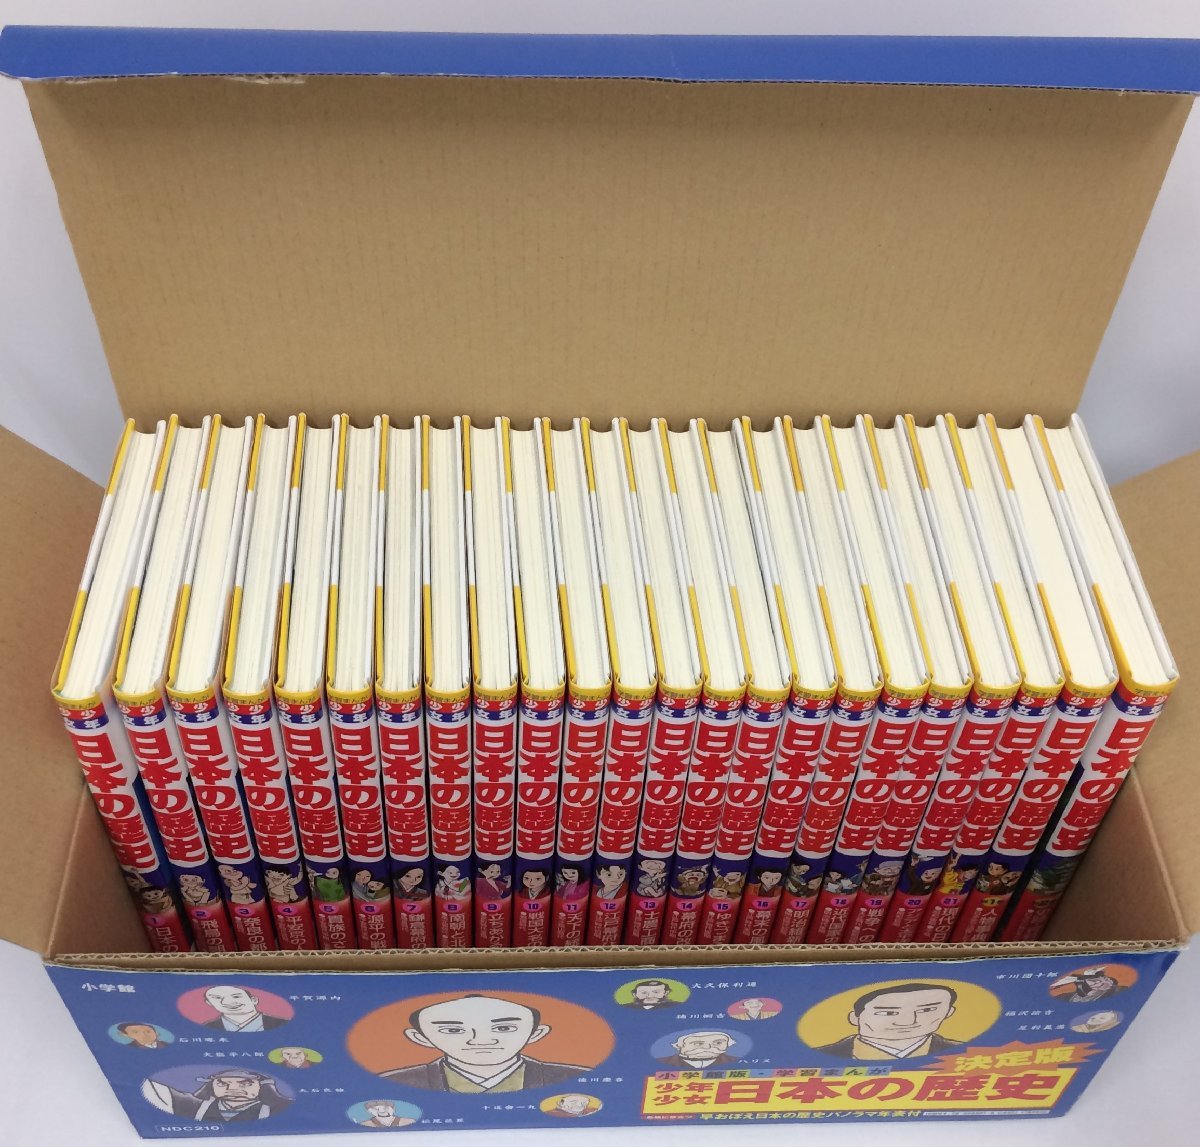 Ib445* Shogakukan Inc. version study ... boy young lady Japanese history all 21 volume + another volume 1*2 all 23 pcs. set year table attaching used / beautiful goods *